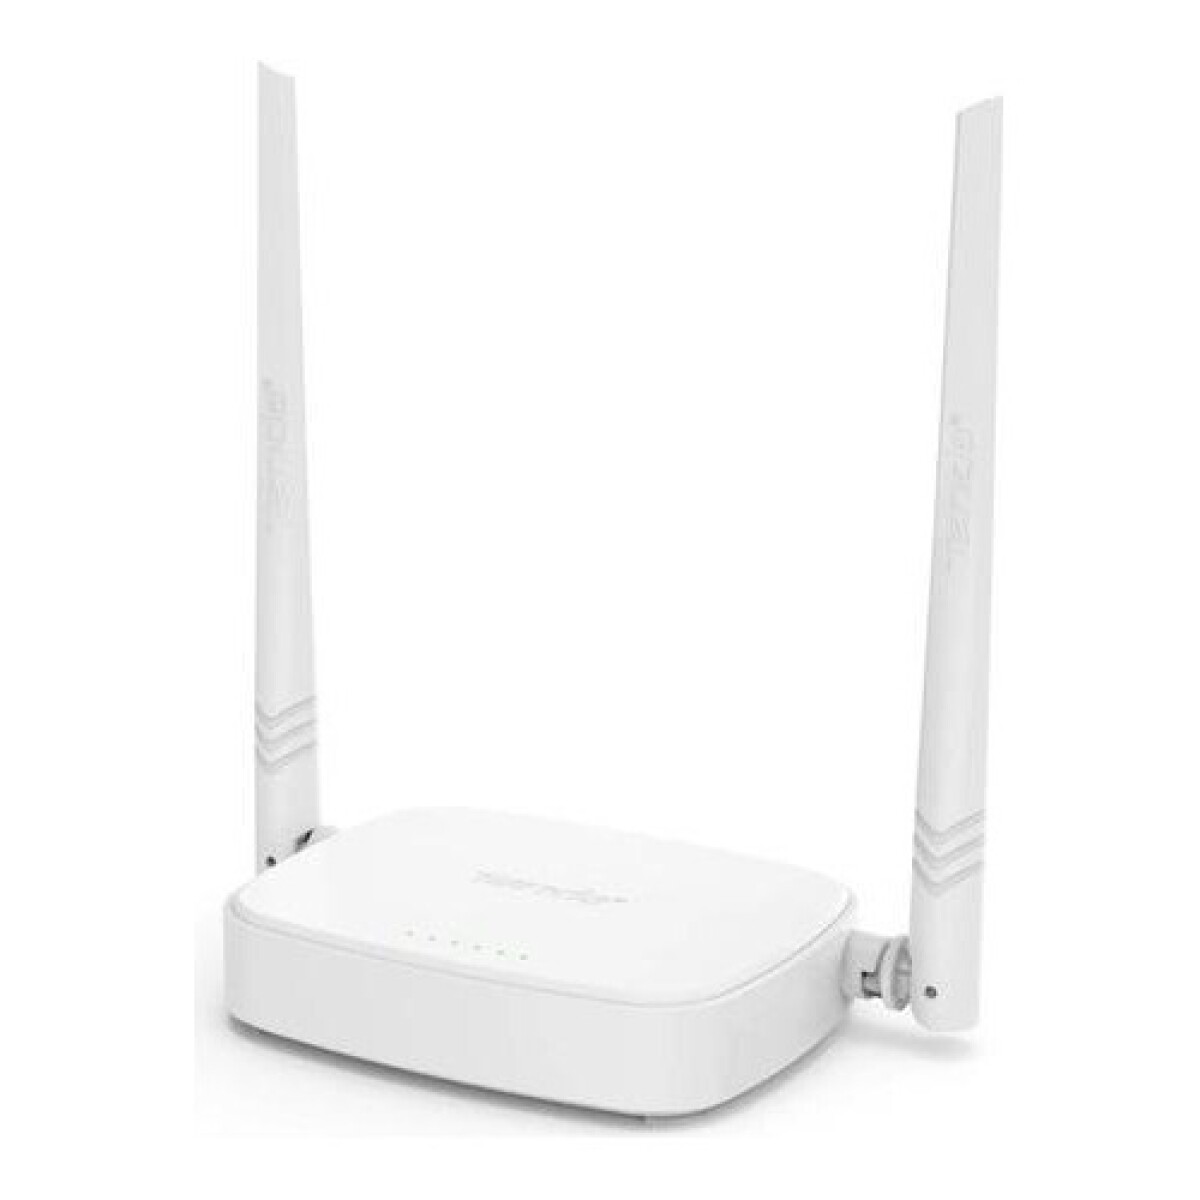 Router inalámbrico Wifi Tenda N301 300mbps - Blanco 